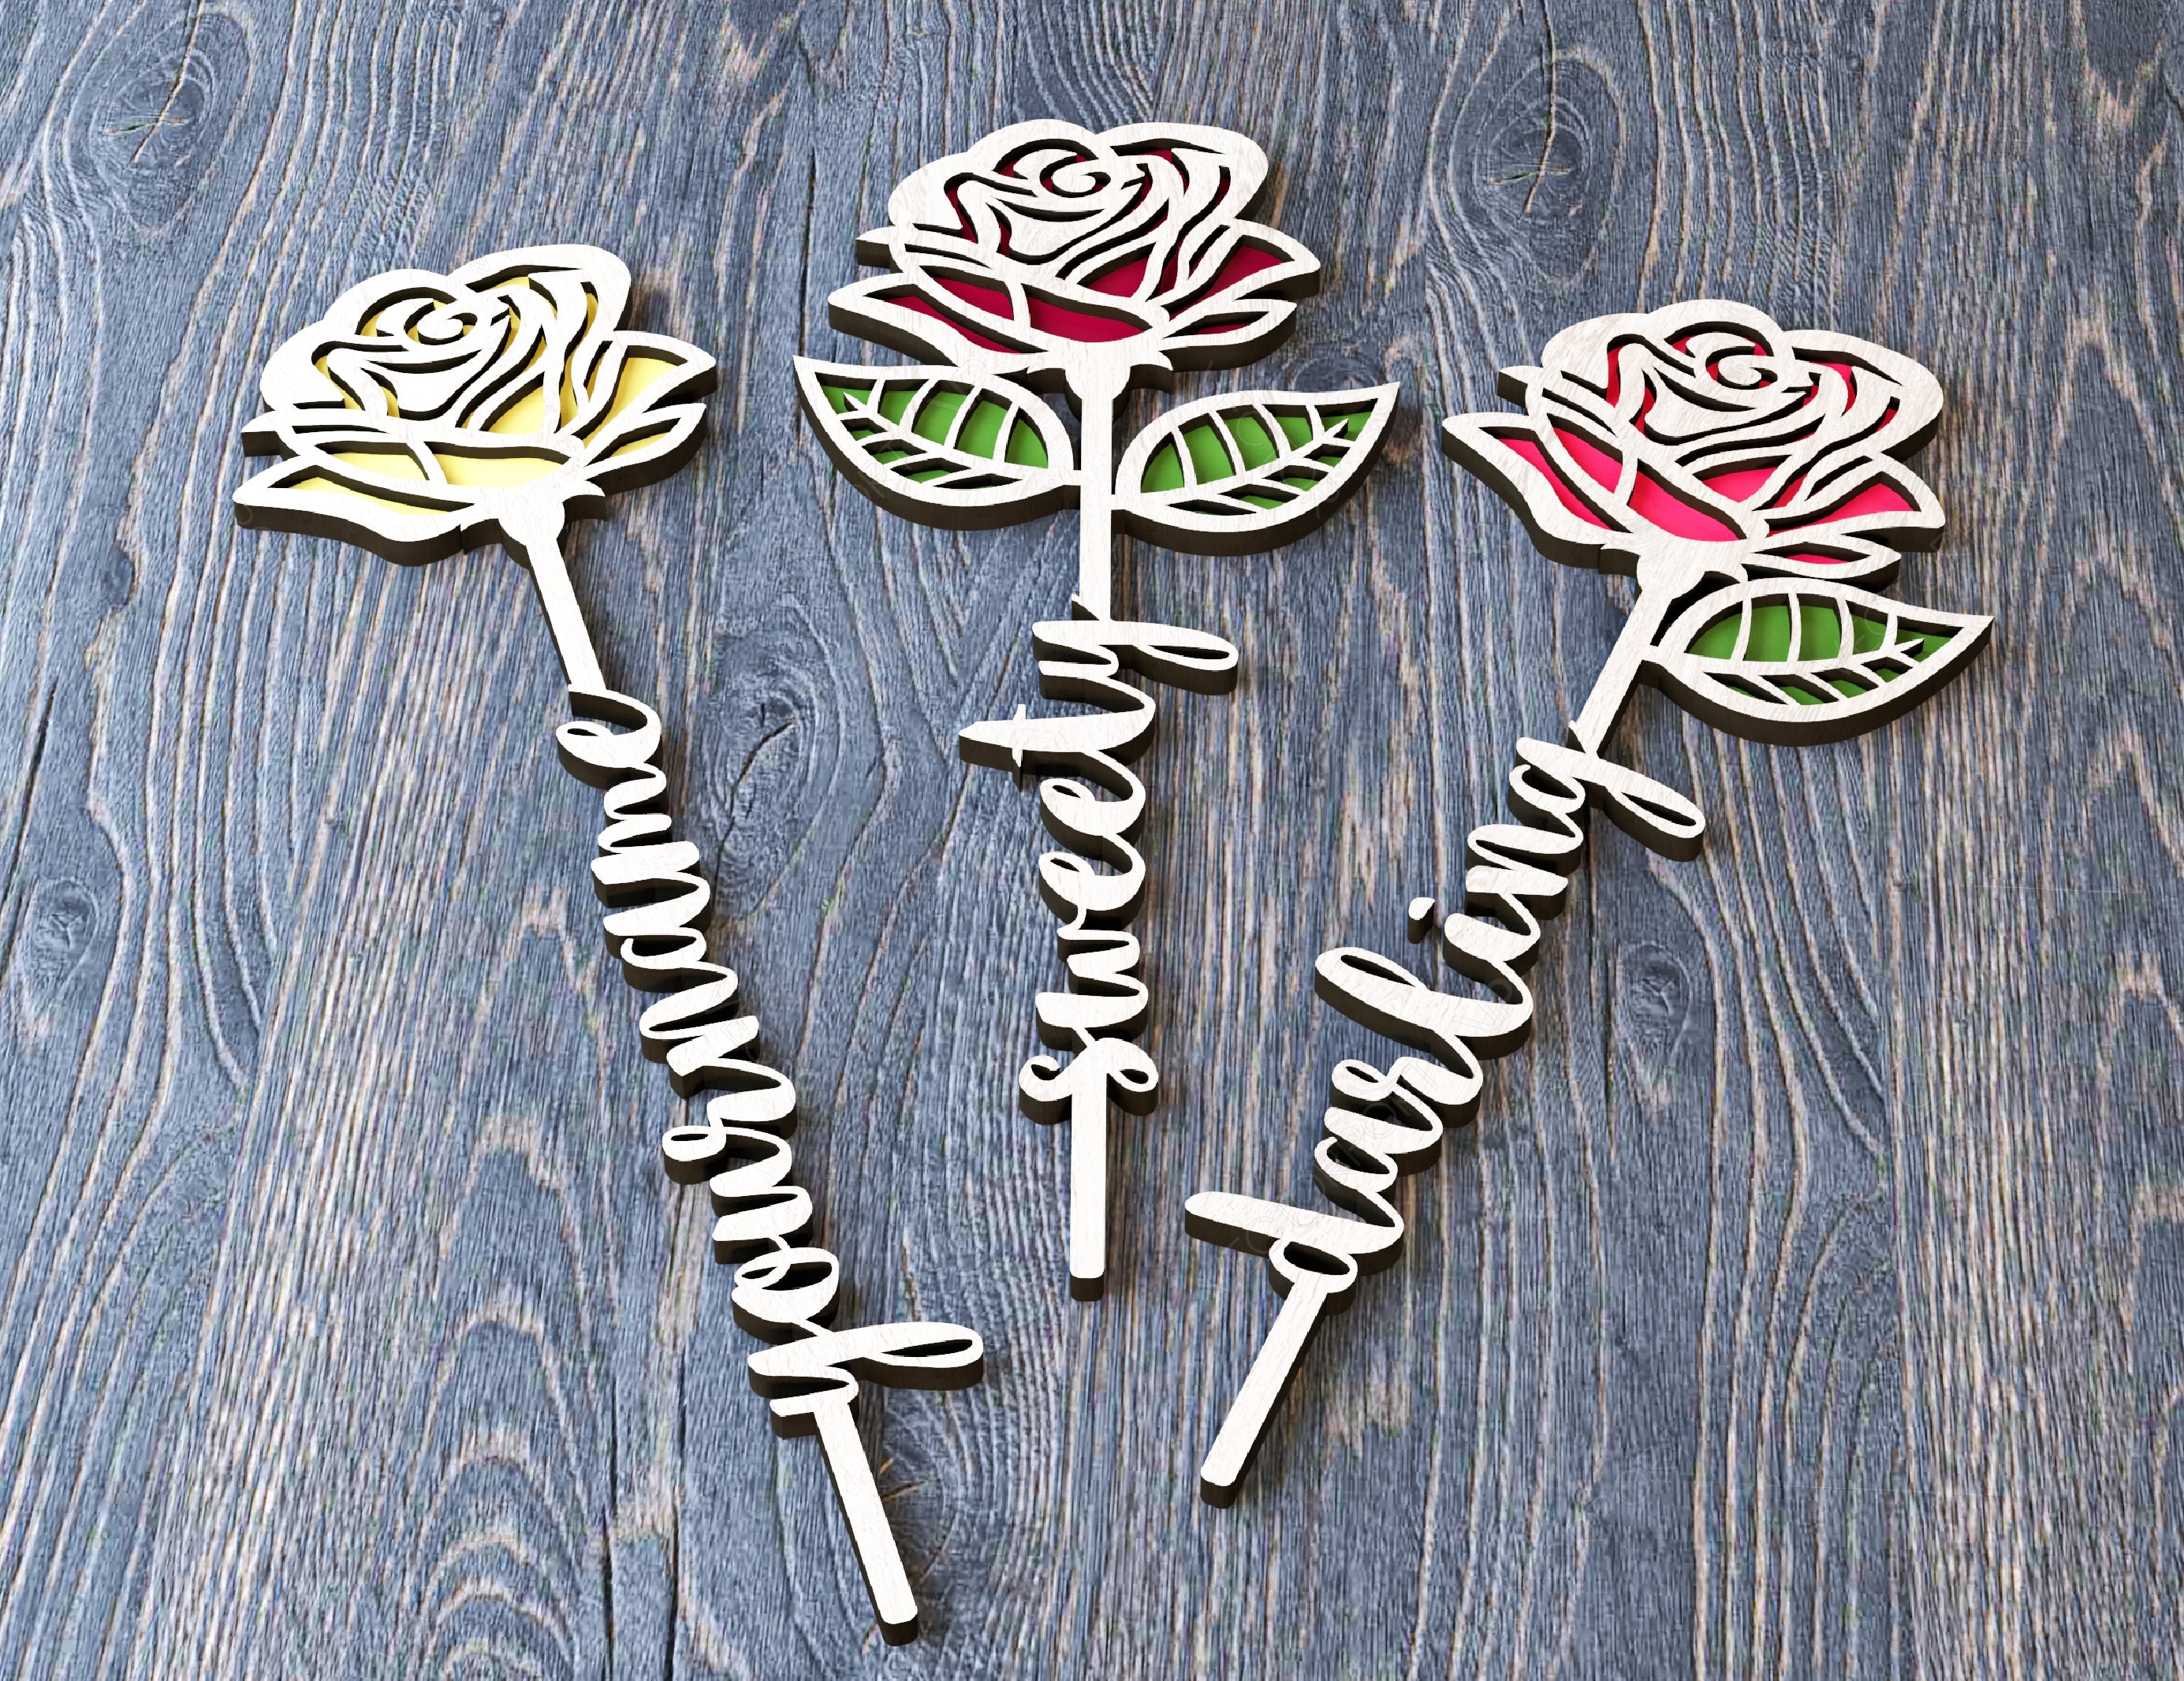 Rose Personalized Flower Laser Cut Out Art Valentine Day Acrylic wood Flower with name editable Cut Files Digital Product |#U169|